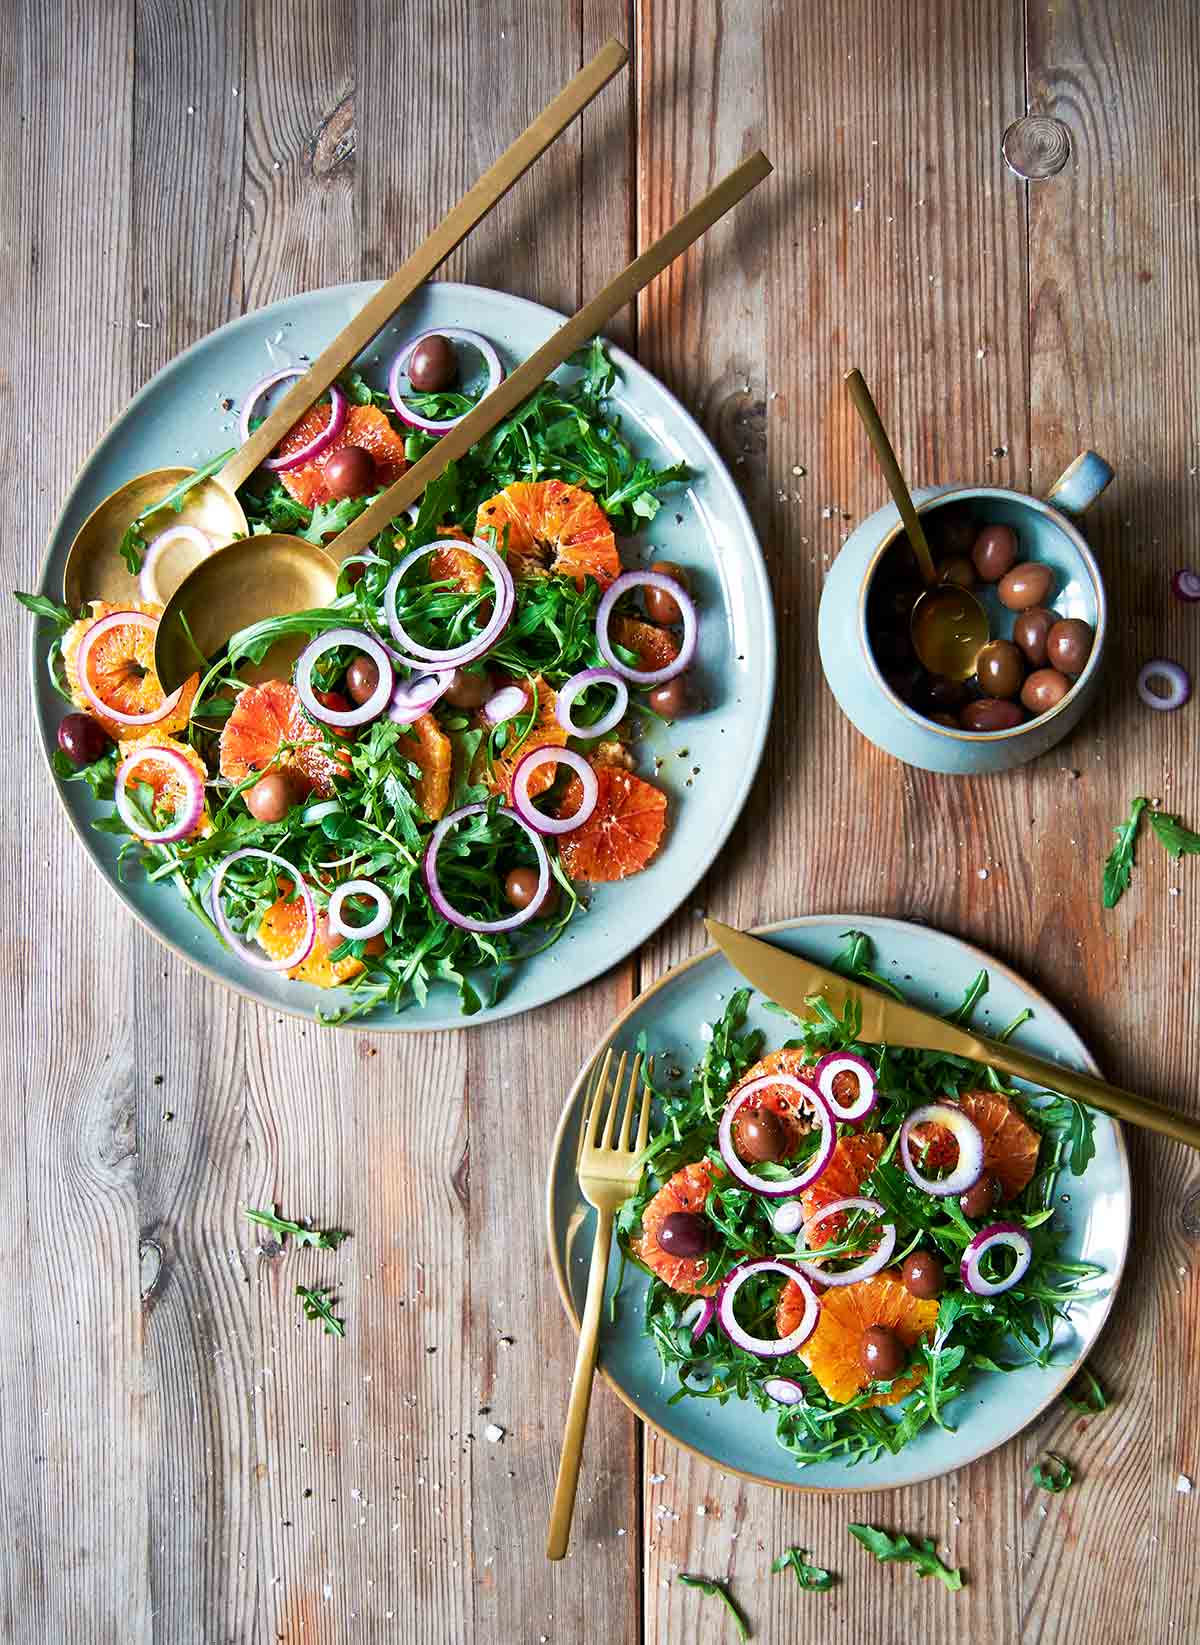 A large platter and smaller plate topped with blood orange and arugula salad with a dish of black olives on the side.